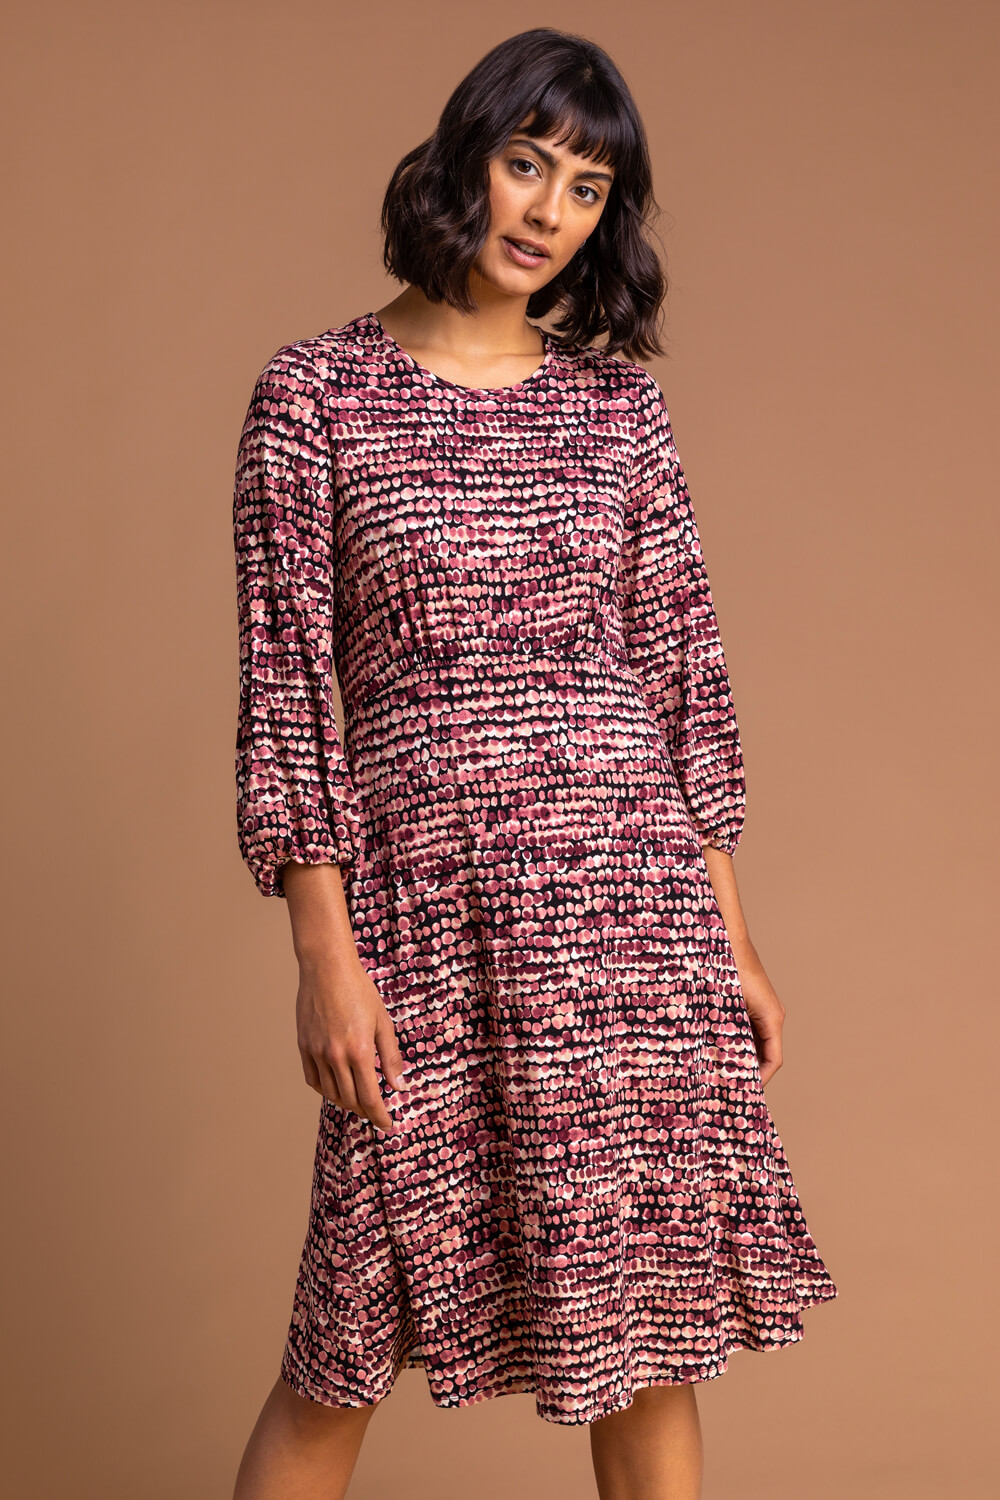 Rose Abstract Spot Fit & Flare Tea Dress, Image 5 of 5